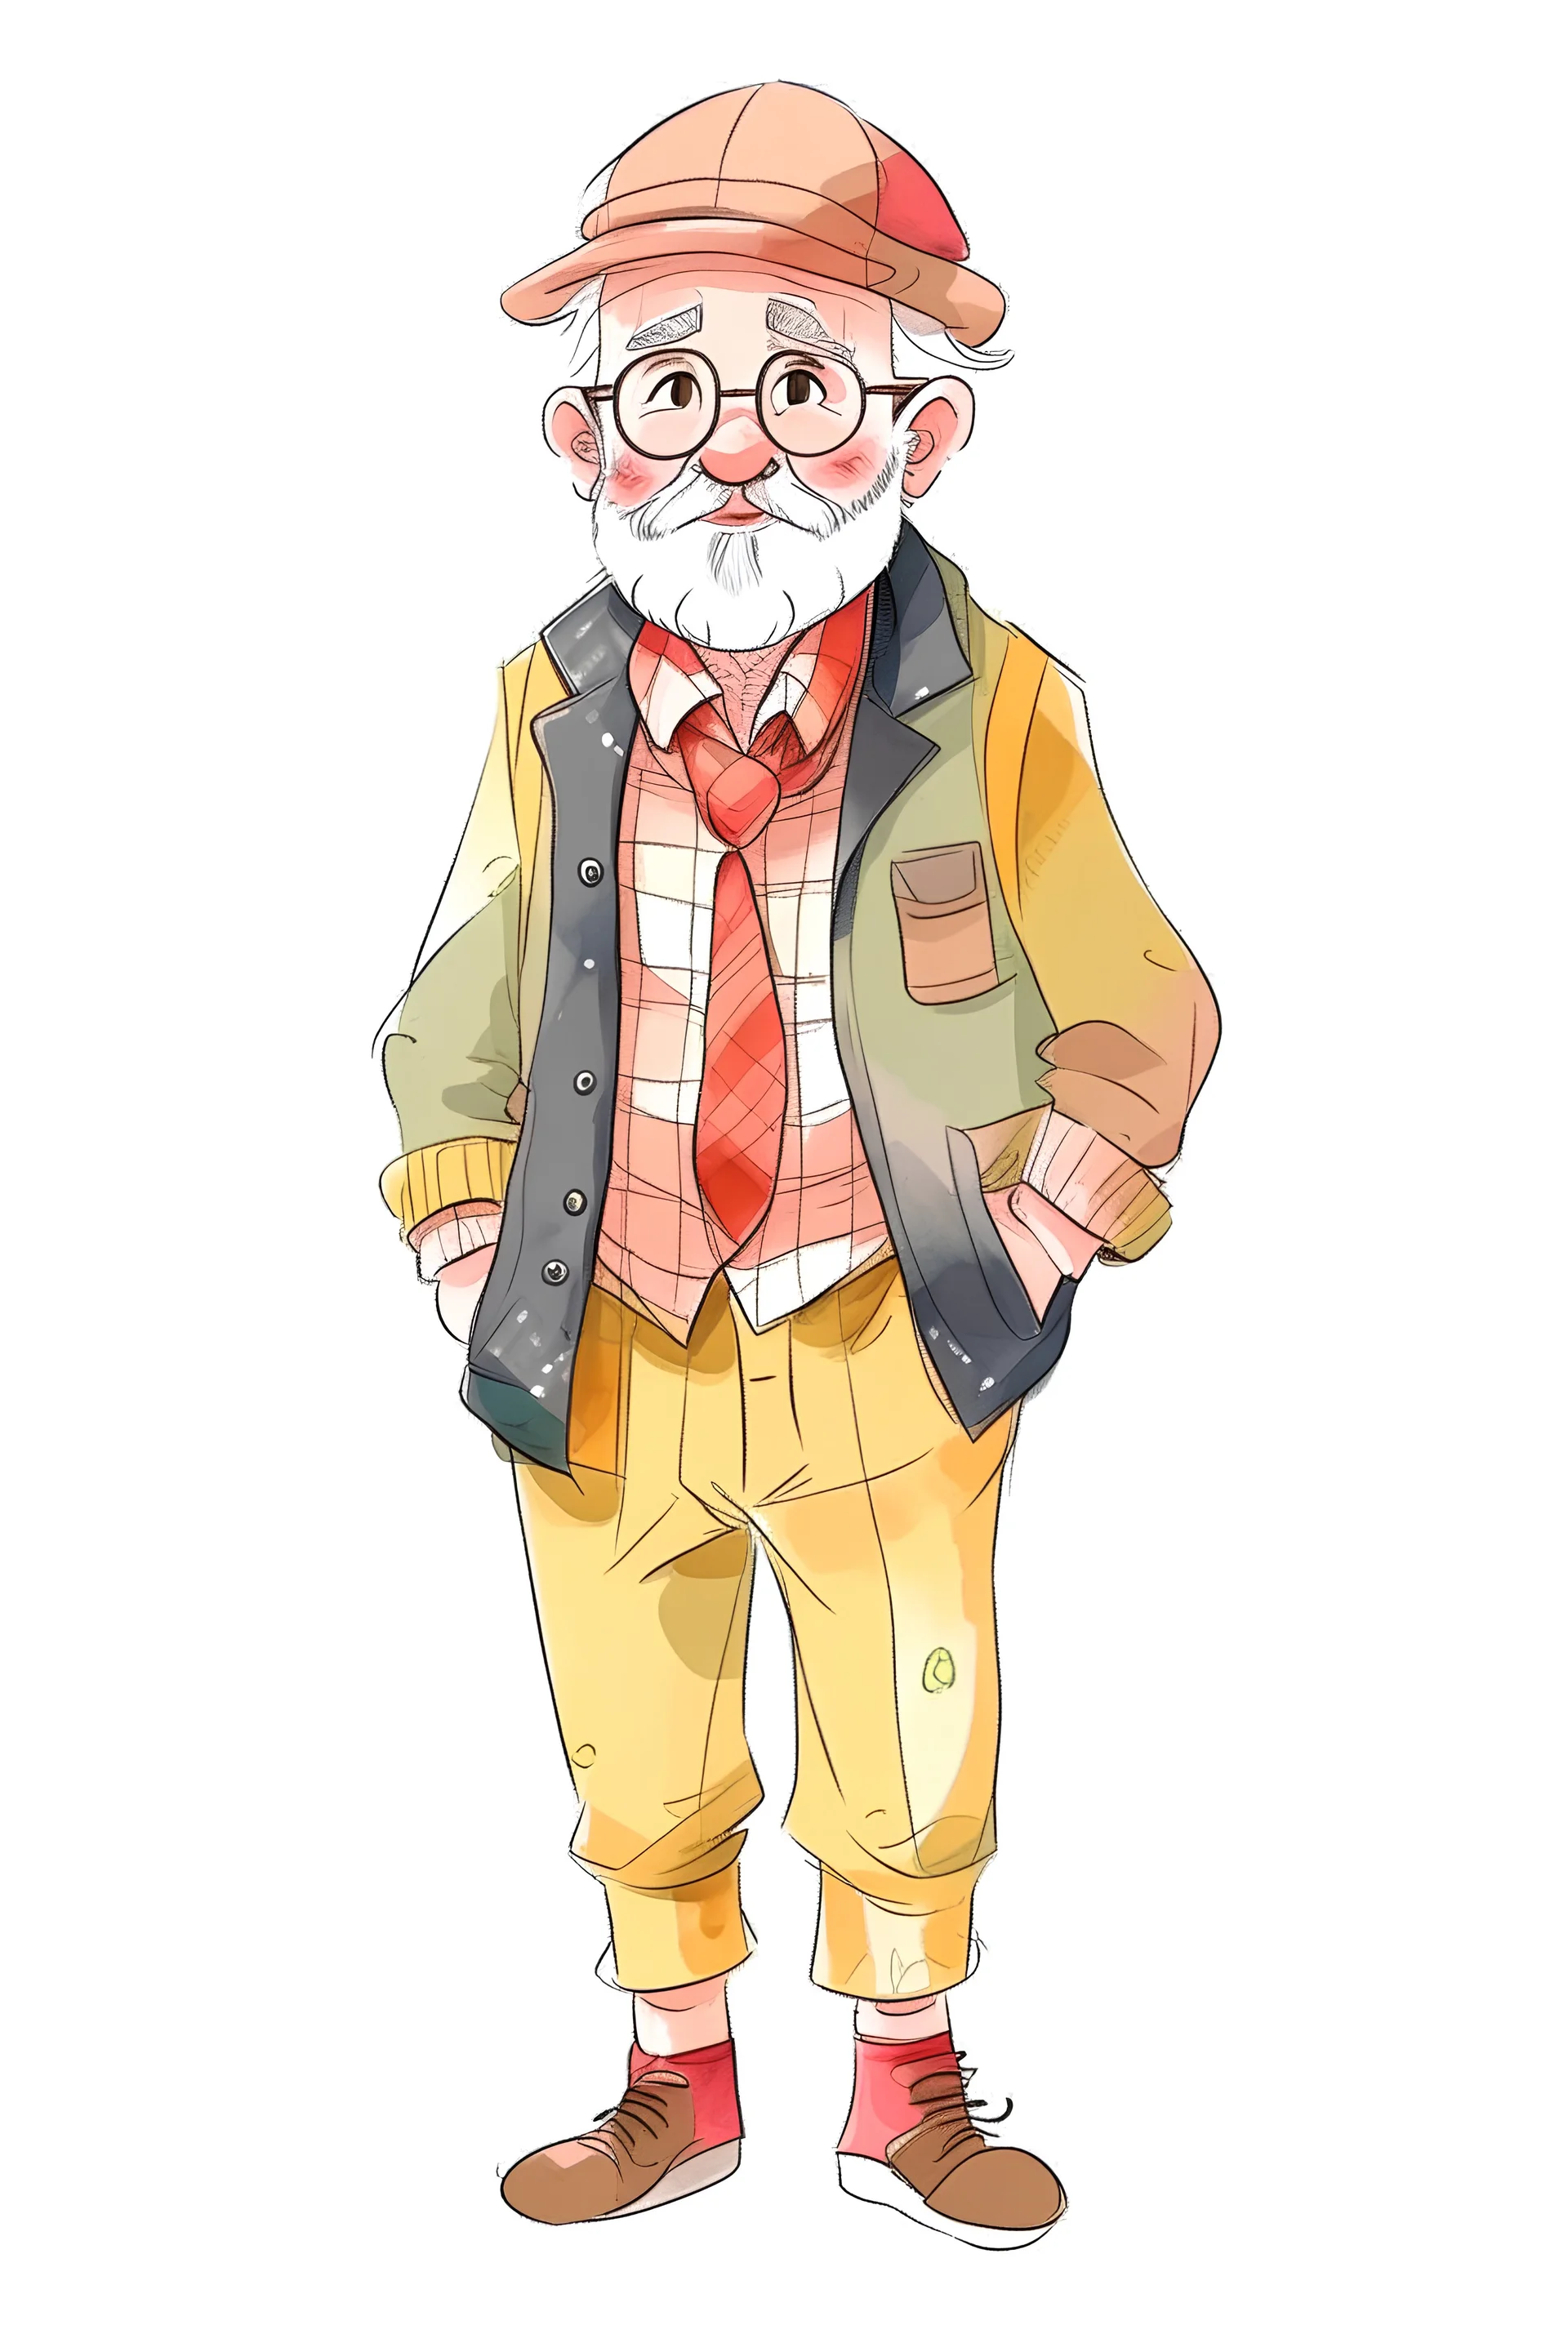 An old man wearing children's clothes